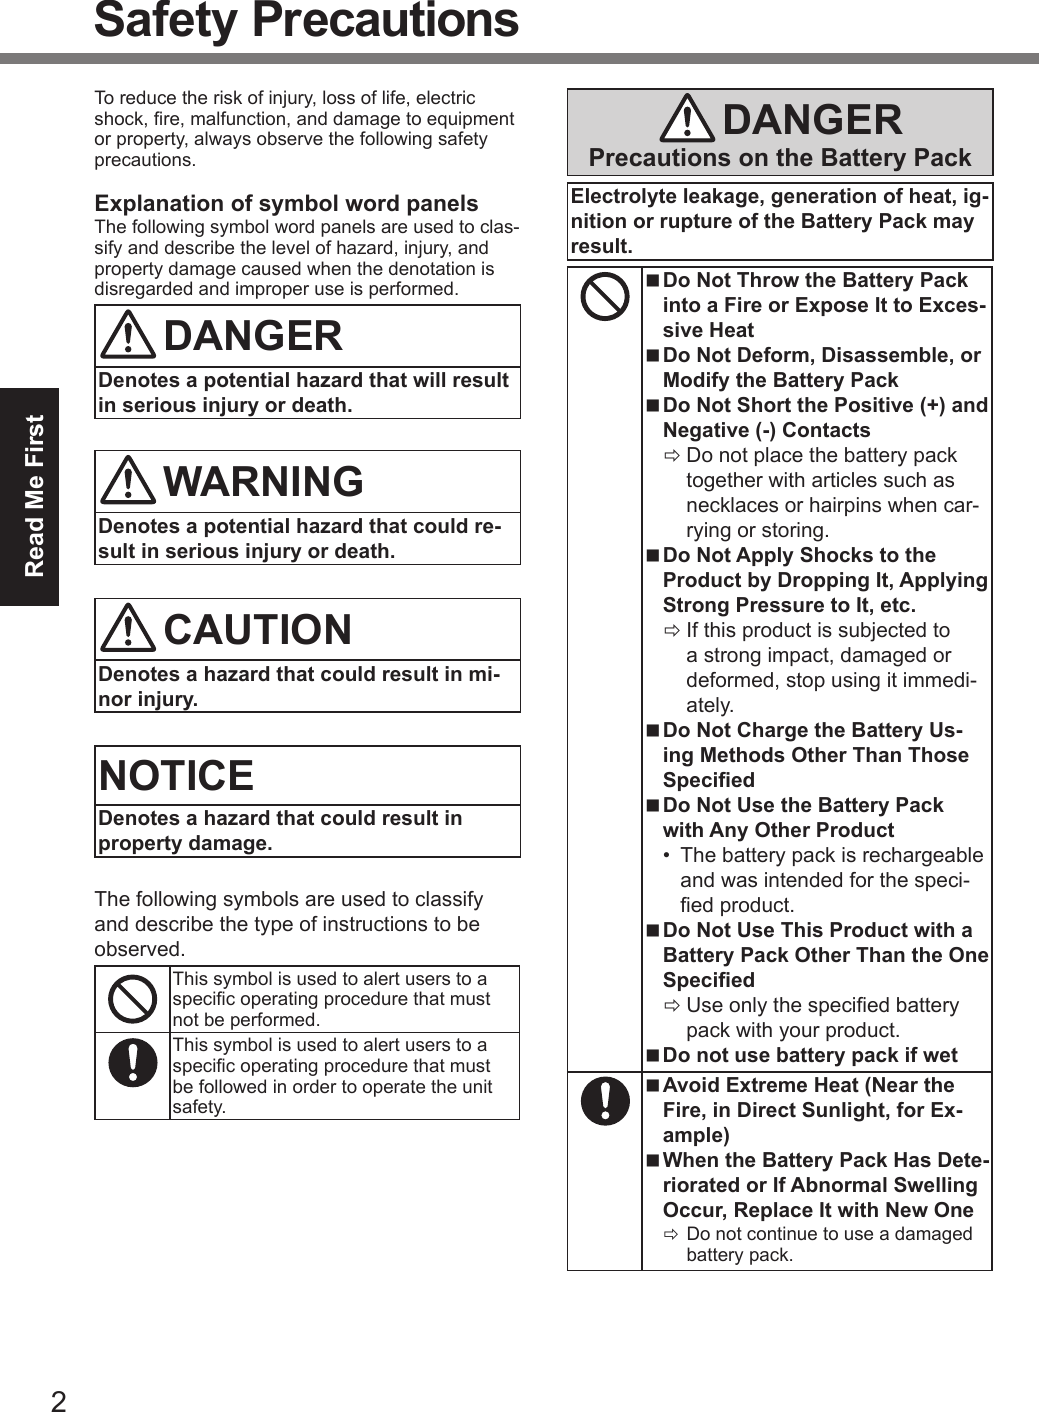 2Read Me FirstSafety PrecautionsTo reduce the risk of injury, loss of life, electric shock, re, malfunction, and damage to equipment or property, always observe the following safety precautions.Explanation of symbol word panelsThe following symbol word panels are used to clas-sify and describe the level of hazard, injury, and property damage caused when the denotation is disregarded and improper use is performed.DANGERDenotes a potential hazard that will result in serious injury or death.WARNINGDenotes a potential hazard that could re-sult in serious injury or death.CAUTIONDenotes a hazard that could result in mi-nor injury.NOTICEDenotes a hazard that could result in property damage.The following symbols are used to classify and describe the type of instructions to be observed.This symbol is used to alert users to a specic operating procedure that must not be performed.This symbol is used to alert users to a specic operating procedure that must be followed in order to operate the unit safety.DANGERPrecautions on the Battery PackElectrolyte leakage, generation of heat, ig-nition or rupture of the Battery Pack may result. nDo Not Throw the Battery Packinto a Fire or Expose It to Exces-sive Heat nDo Not Deform, Disassemble, orModify the Battery Pack nDo Not Short the Positive (+) andNegative (-) Contacts ÖDo not place the battery packtogether with articles such as necklaces or hairpins when car-rying or storing. nDo Not Apply Shocks to theProduct by Dropping It, ApplyingStrong Pressure to It, etc. ÖIf this product is subjected toa strong impact, damaged or deformed, stop using it immedi-ately. nDo Not Charge the Battery Us-ing Methods Other Than ThoseSpecied nDo Not Use the Battery Packwith Any Other Product• The battery pack is rechargeableand was intended for the speci-ed product. nDo Not Use This Product with aBattery Pack Other Than the OneSpecied ÖUse only the specied batterypack with your product. nDo not use battery pack if wet nAvoid Extreme Heat (Near theFire, in Direct Sunlight, for Ex-ample) nWhen the Battery Pack Has Dete-riorated or If Abnormal SwellingOccur, Replace It with New One ÖDo not continue to use a damagedbattery pack.